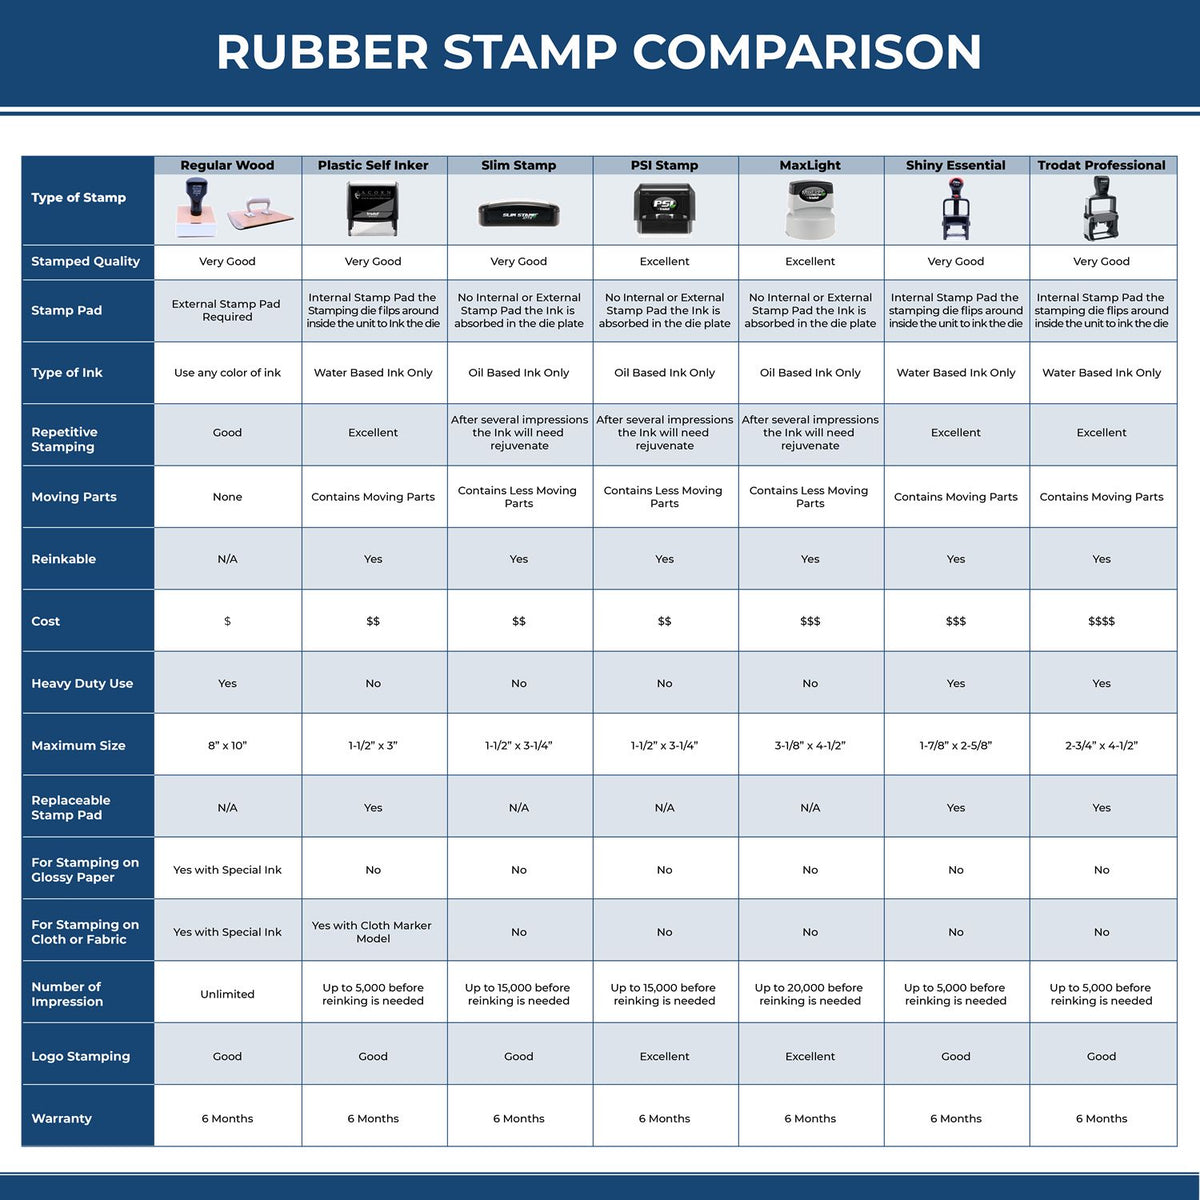 A comparison chart for the different types of mount models available for the Super Slim Maryland Notary Public Stamp.